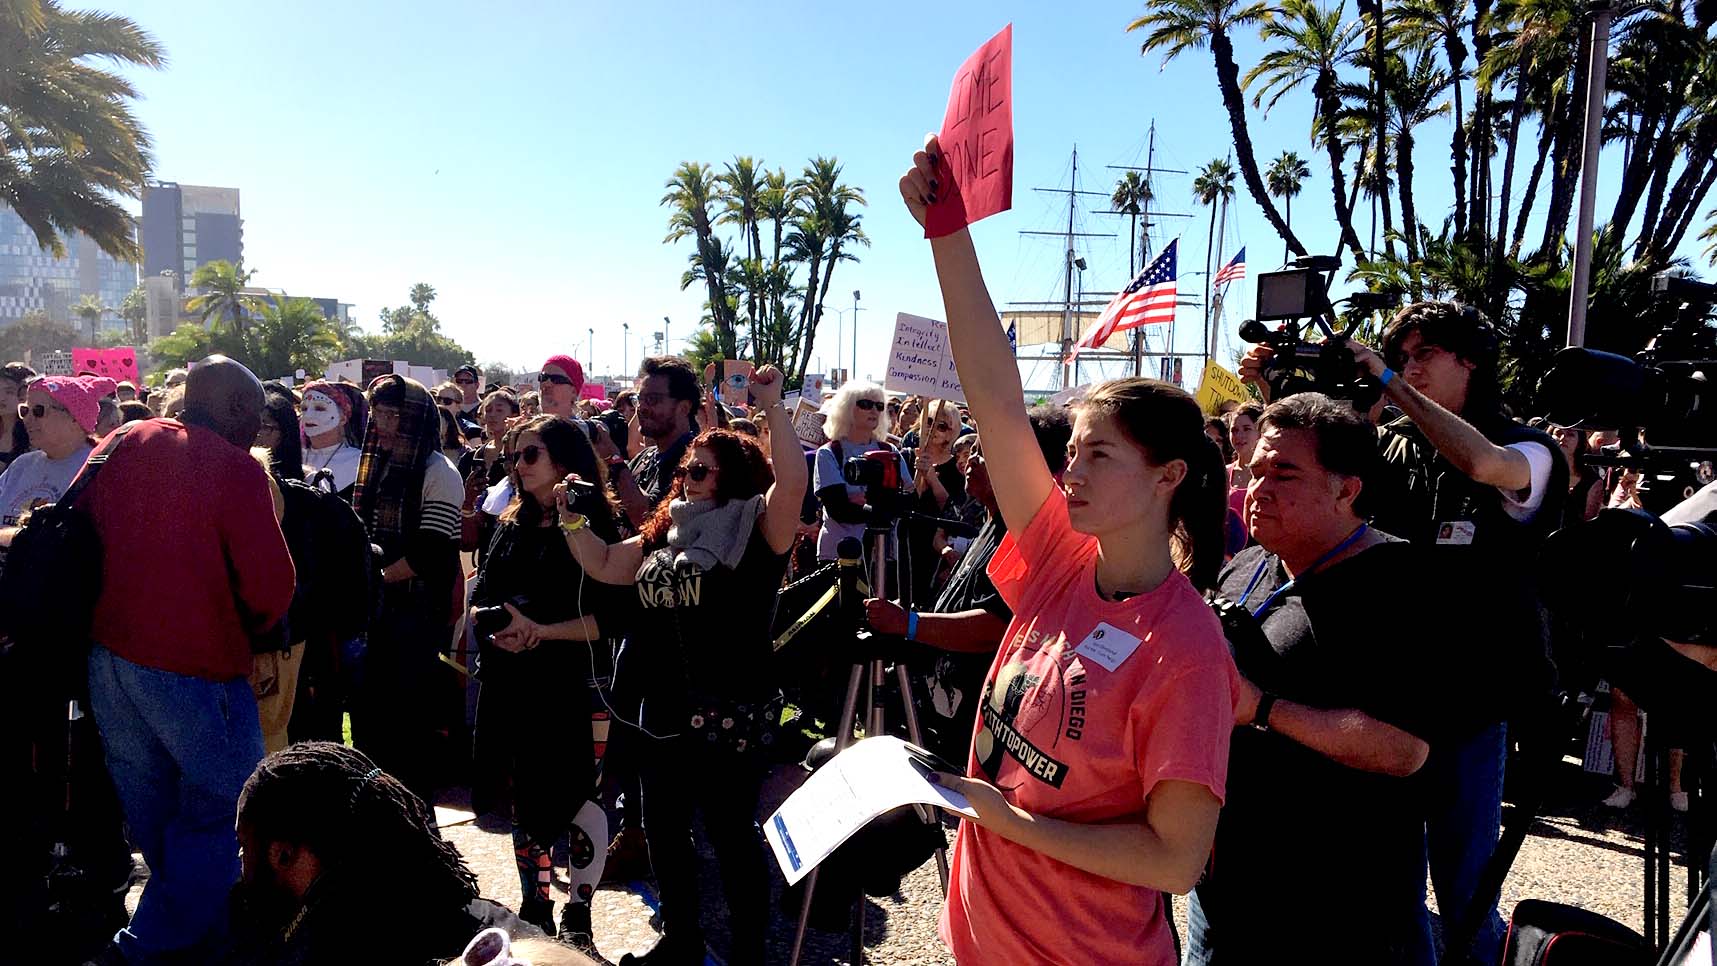 San Diego Women's March: Thousands at 'Truth to Power' Event Downtown - Times of San Diego1717 x 966